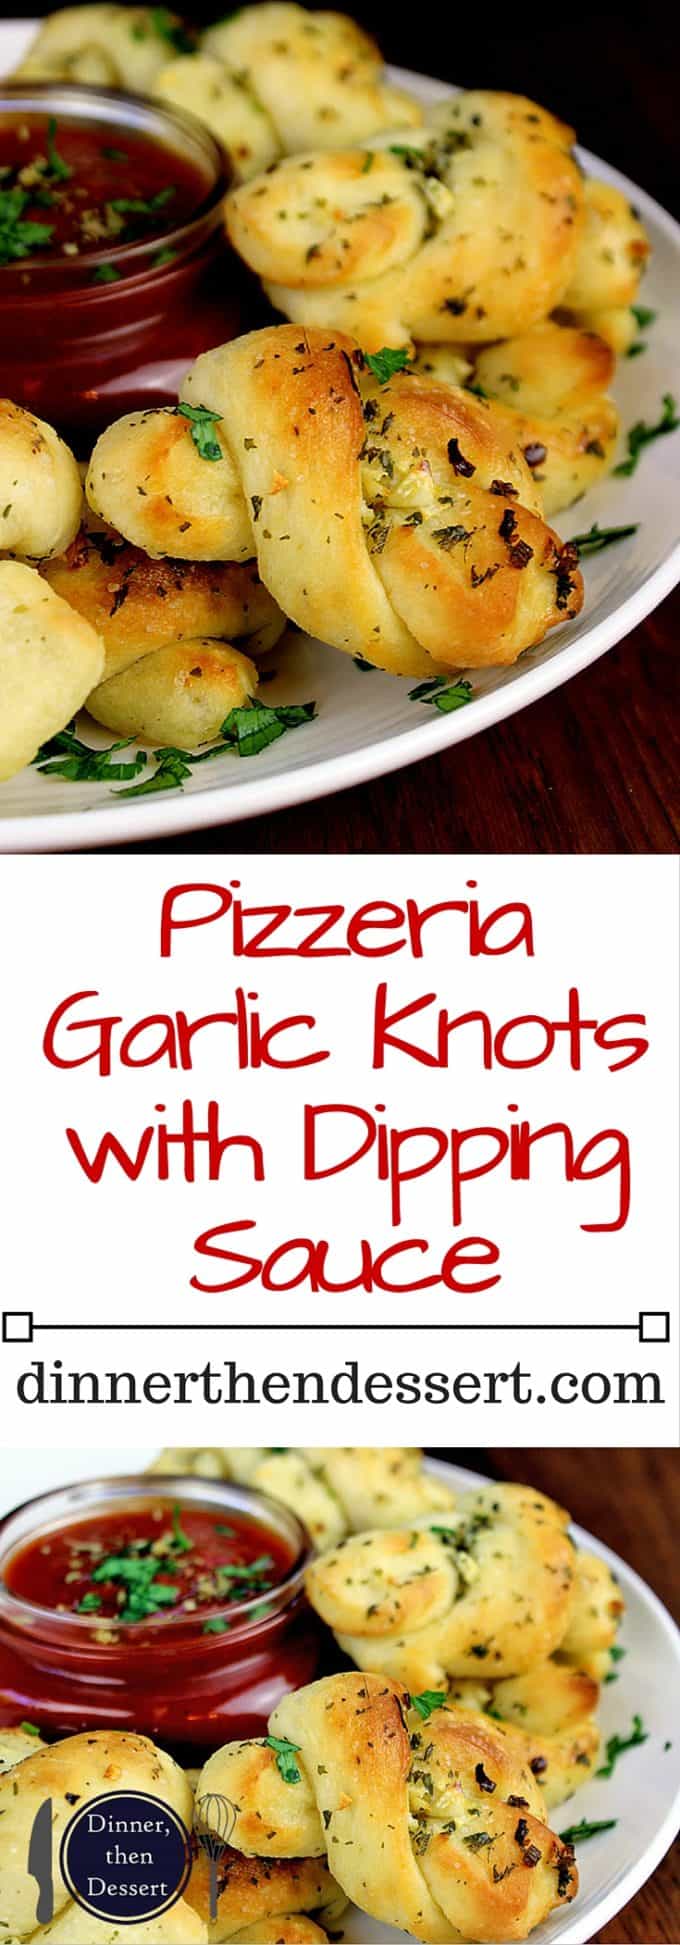 Homemade Pizzeria Garlic Knots with Dipping Sauce! Easy and addictive, so inexpensive to make you'll never order them again!